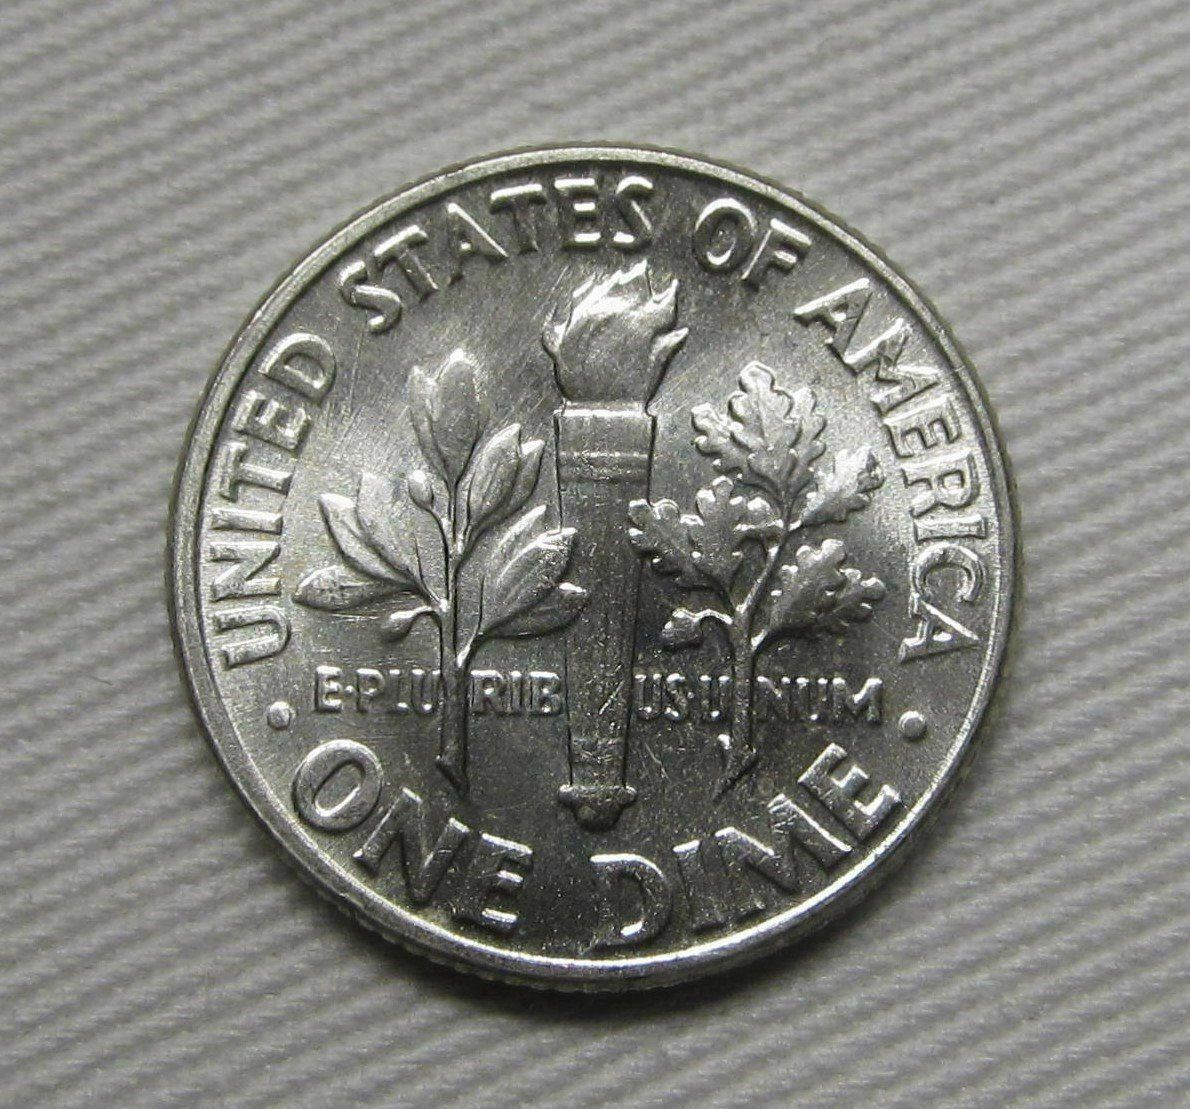 Primary image for 1951-P Roosevelt Dime GEM++ UNC Coin AD830